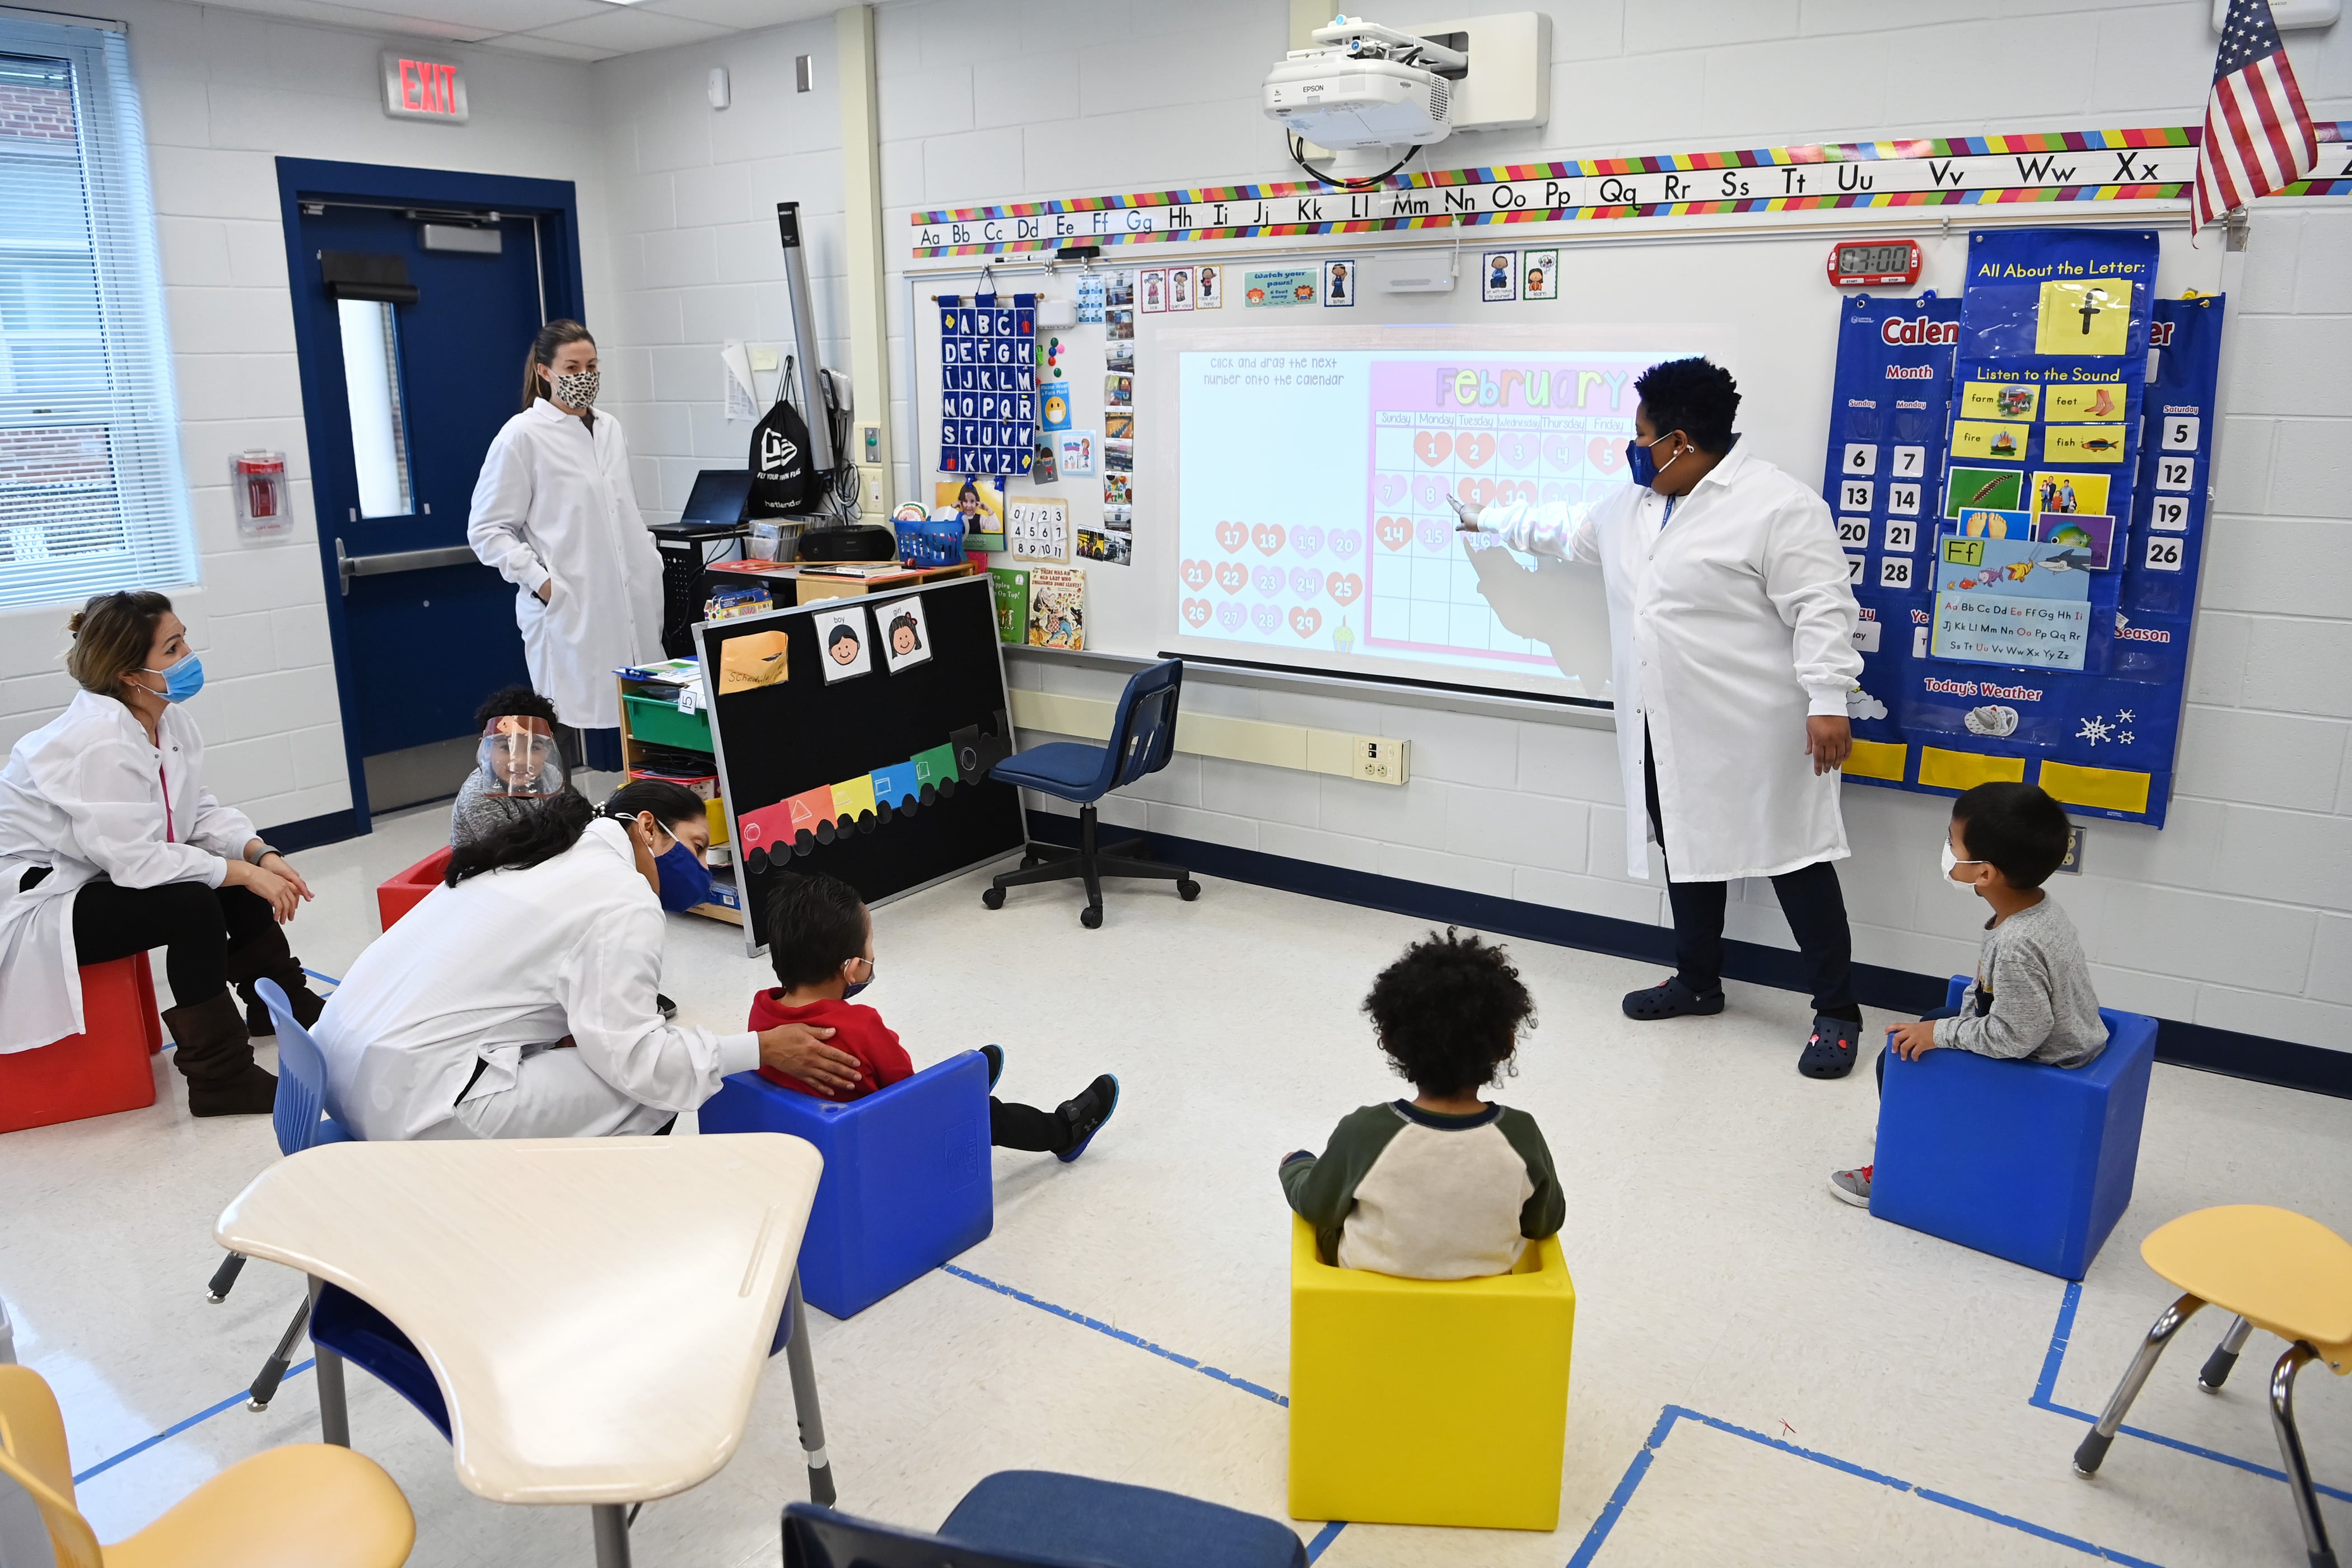 A teacher wearing a white lab coat and face mask points at a picture projected at the front of the class while students wearing face masks sit and watch.